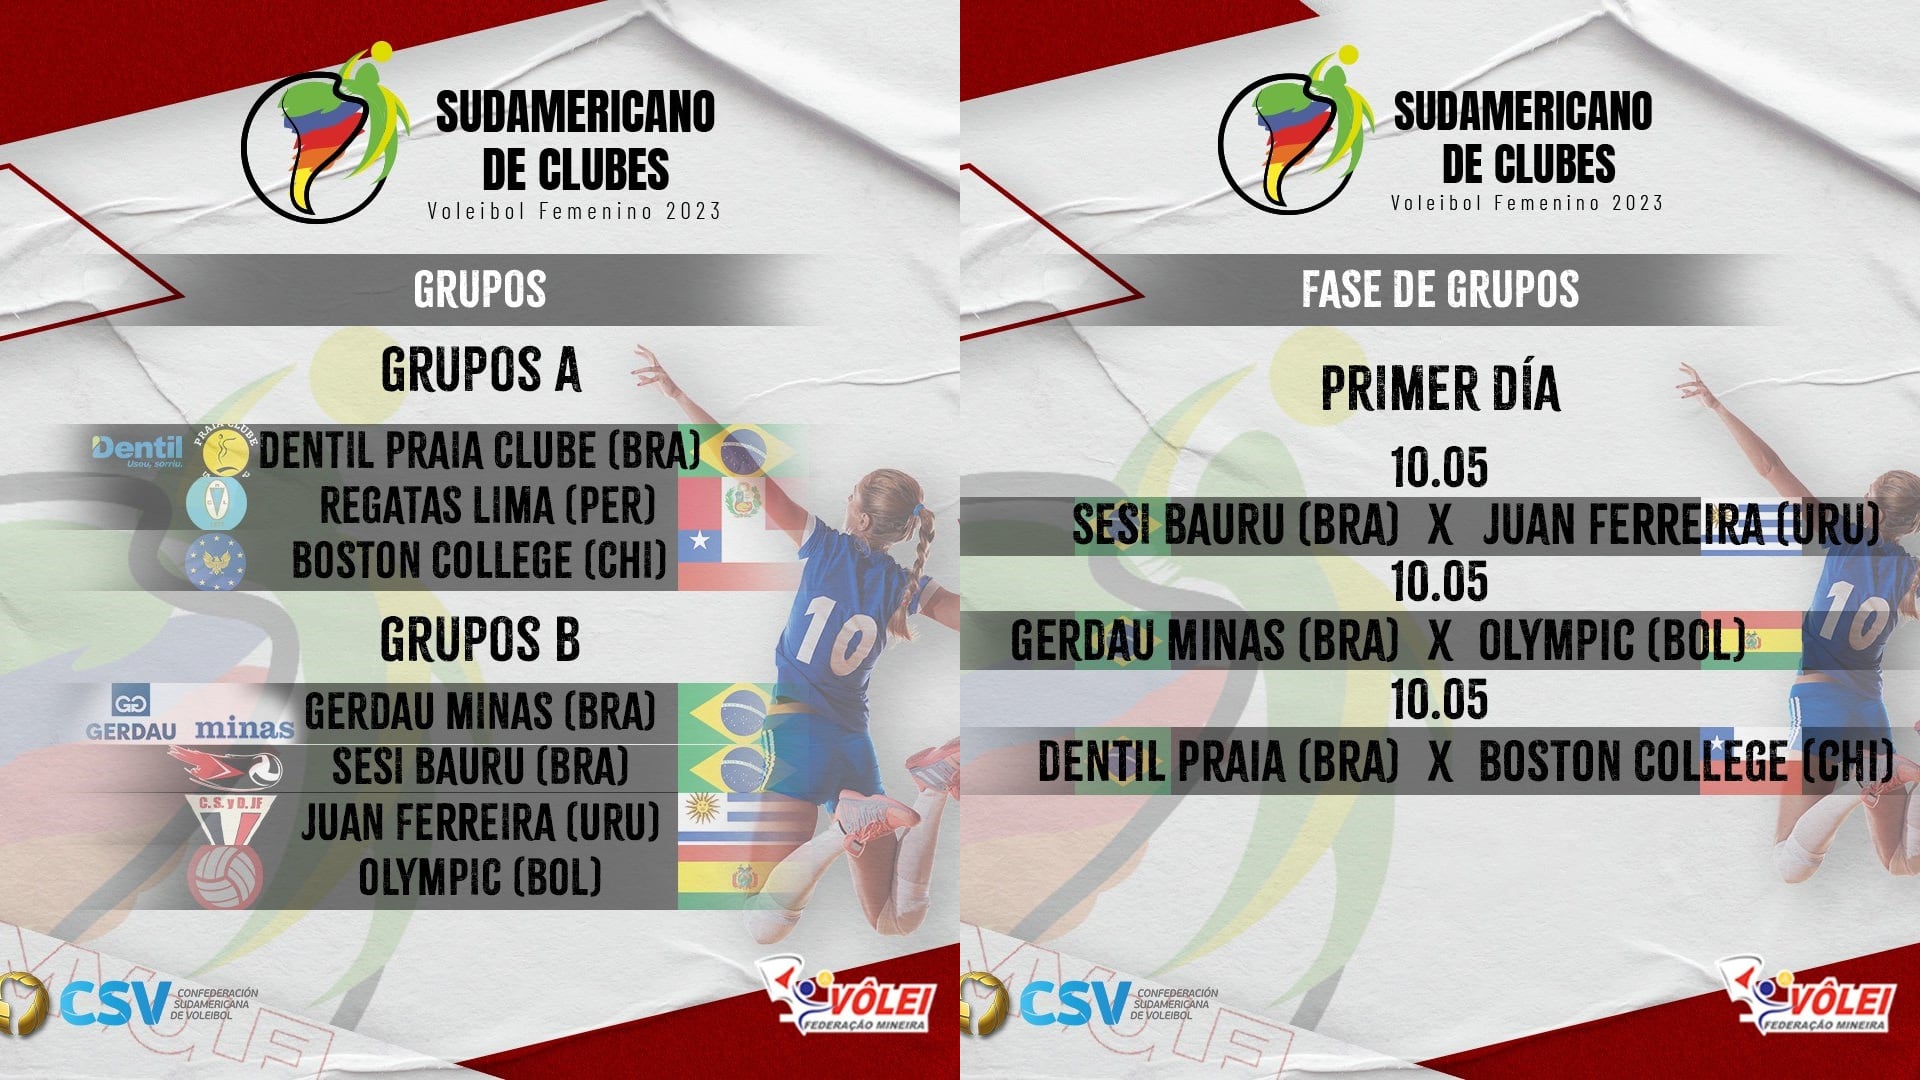 Fixture and groups on how the Sudamericano de Clubes 2023 will be played. (CSV)